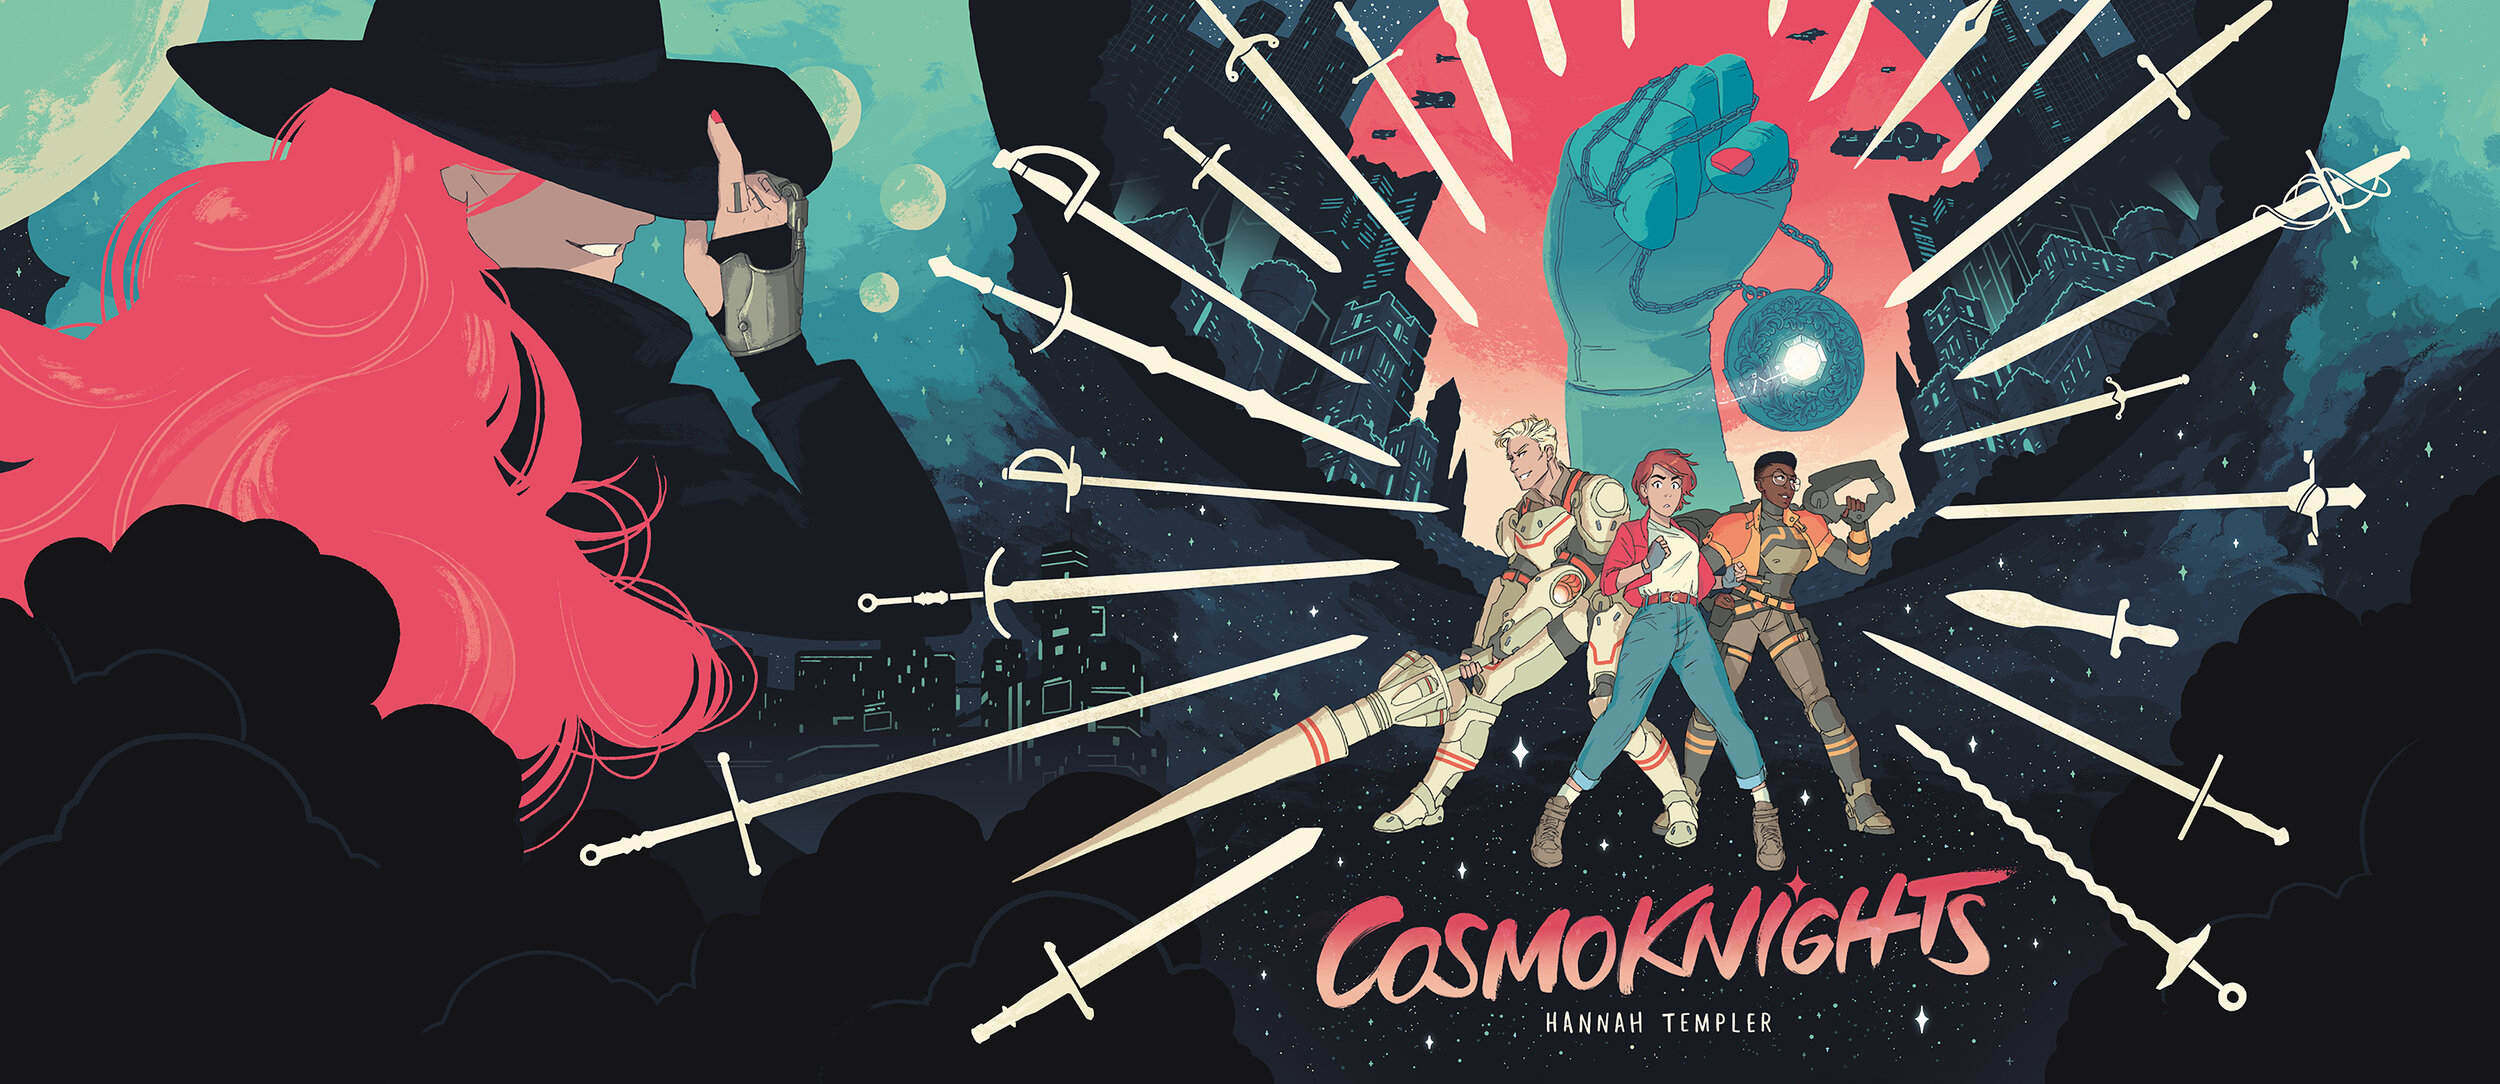  Wraparound cover - Cosmoknights (Book One) - Top Shelf Productions    Read the whole thing online at cosmoknights.space 